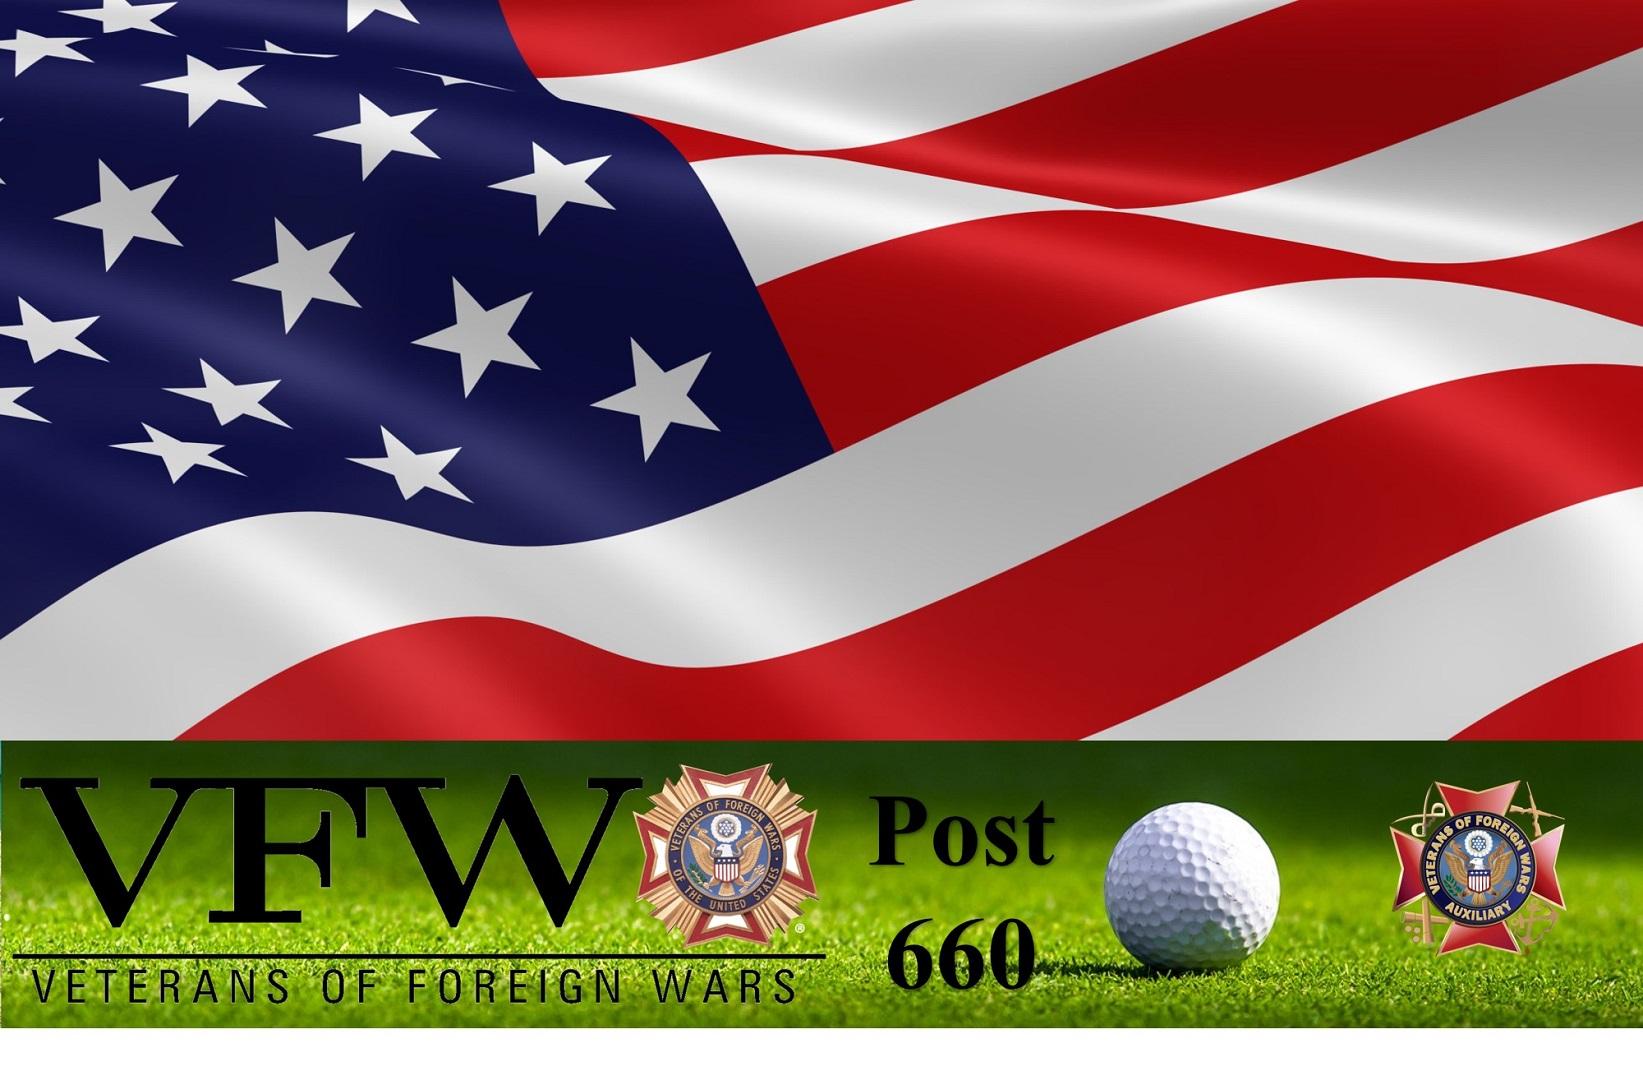 1st Annual VFW Post 660 Charity Golf Tournament for Heroes